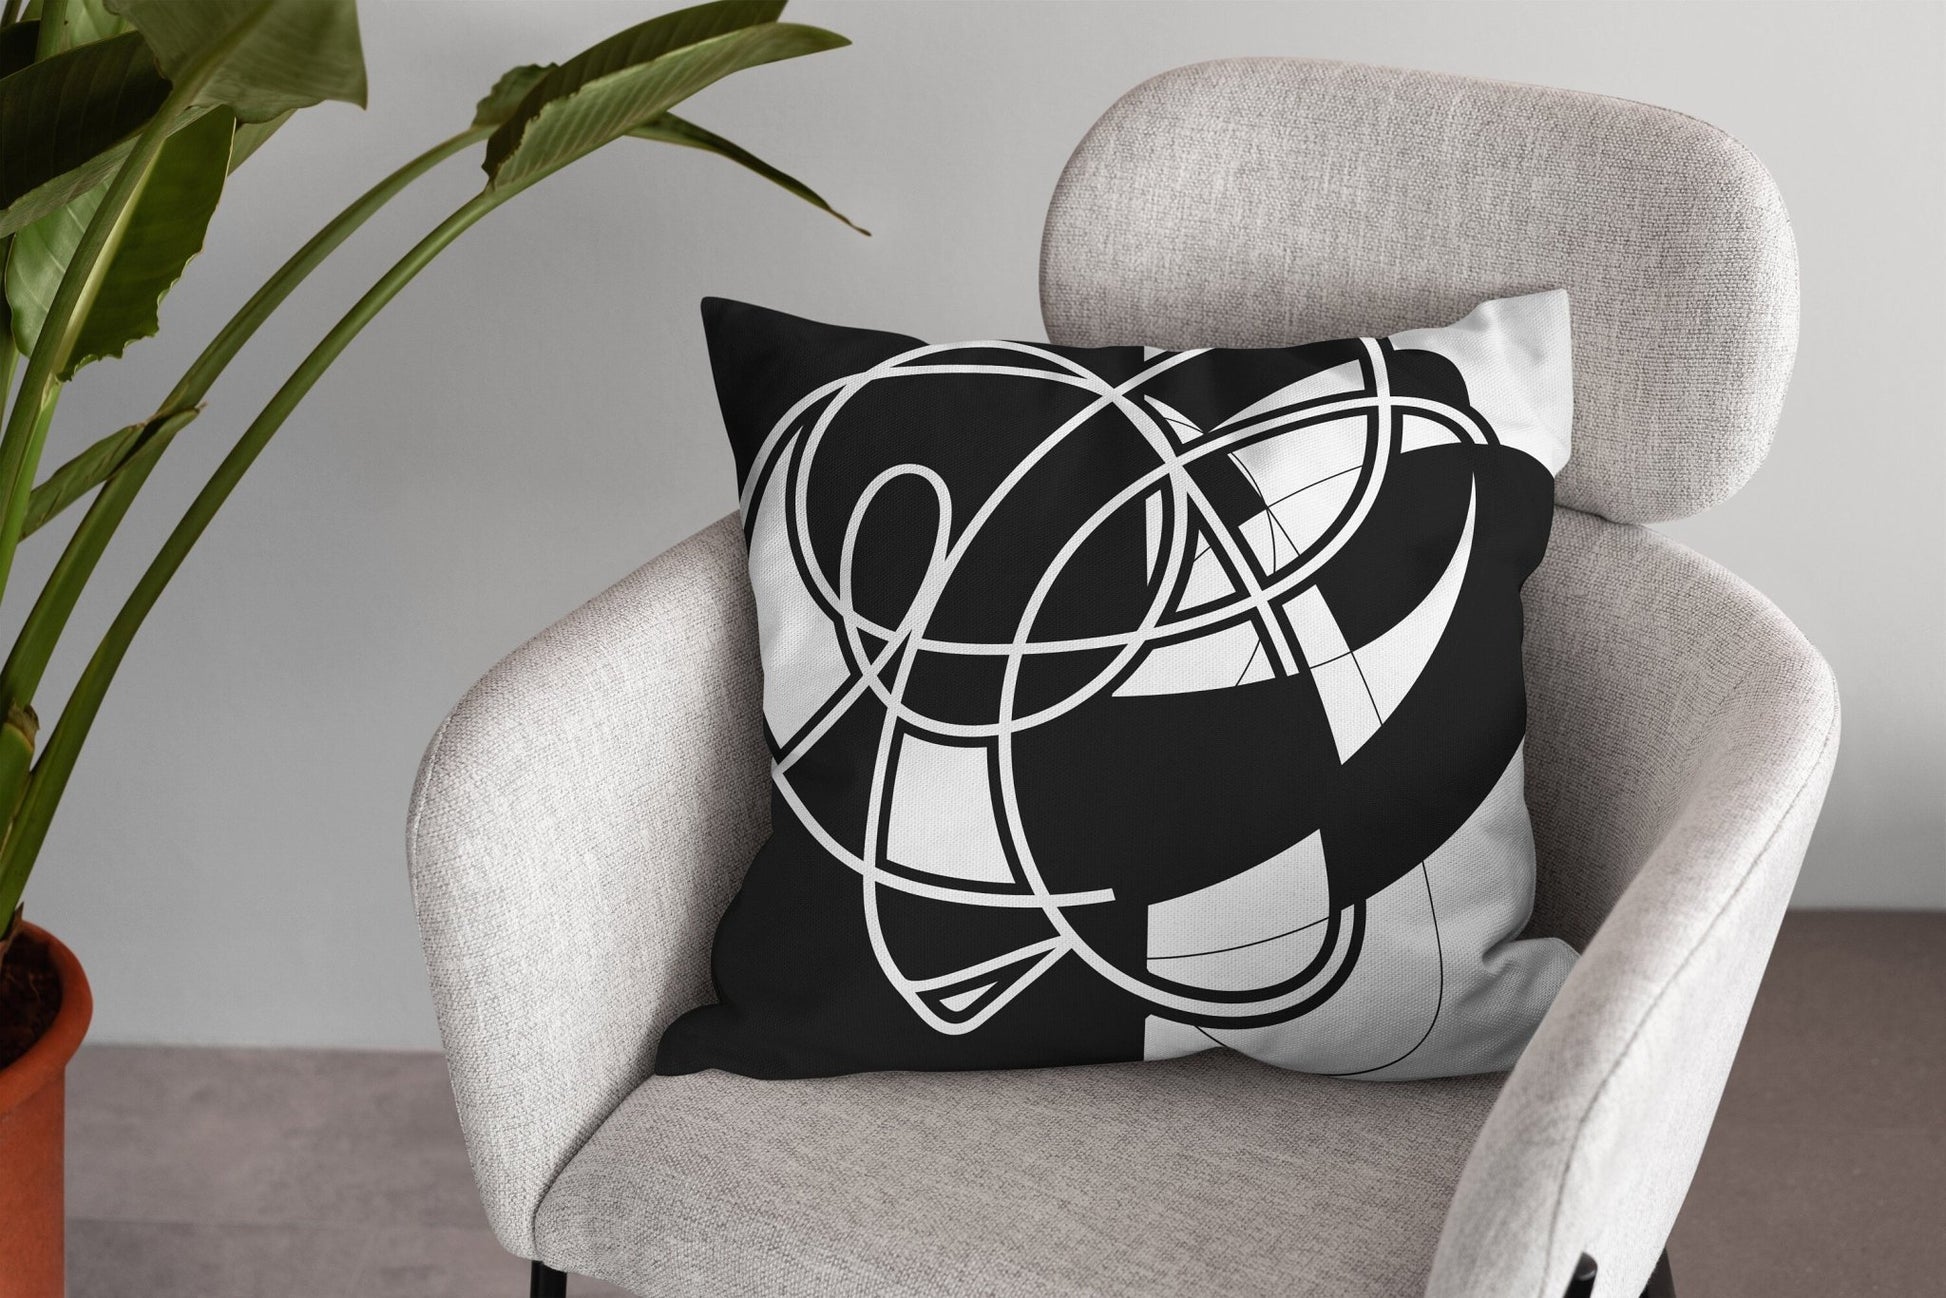 Mid Century Modern Black and White Pillow